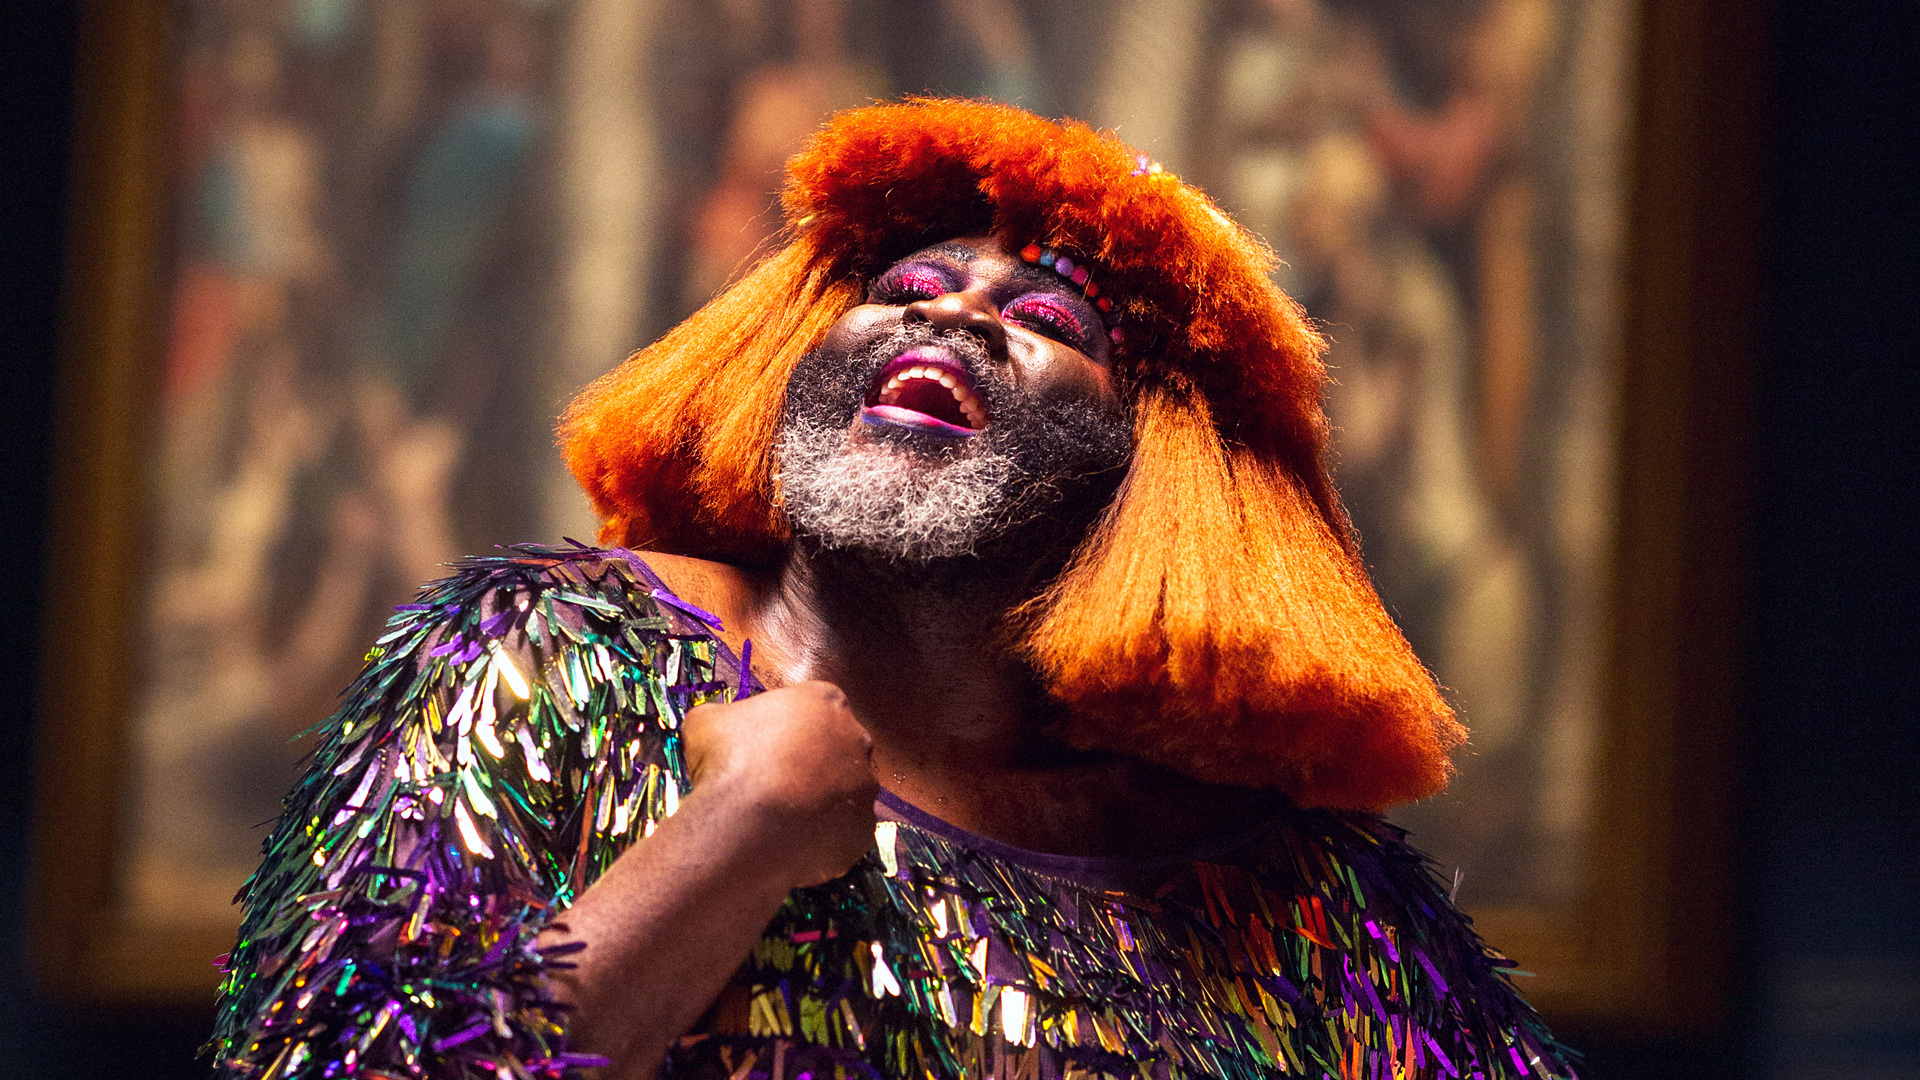 A person with a beard, colorful makeup and short orange hair wearing a colorful, sequined shirt smiles and looks up while holding their hand to their chest